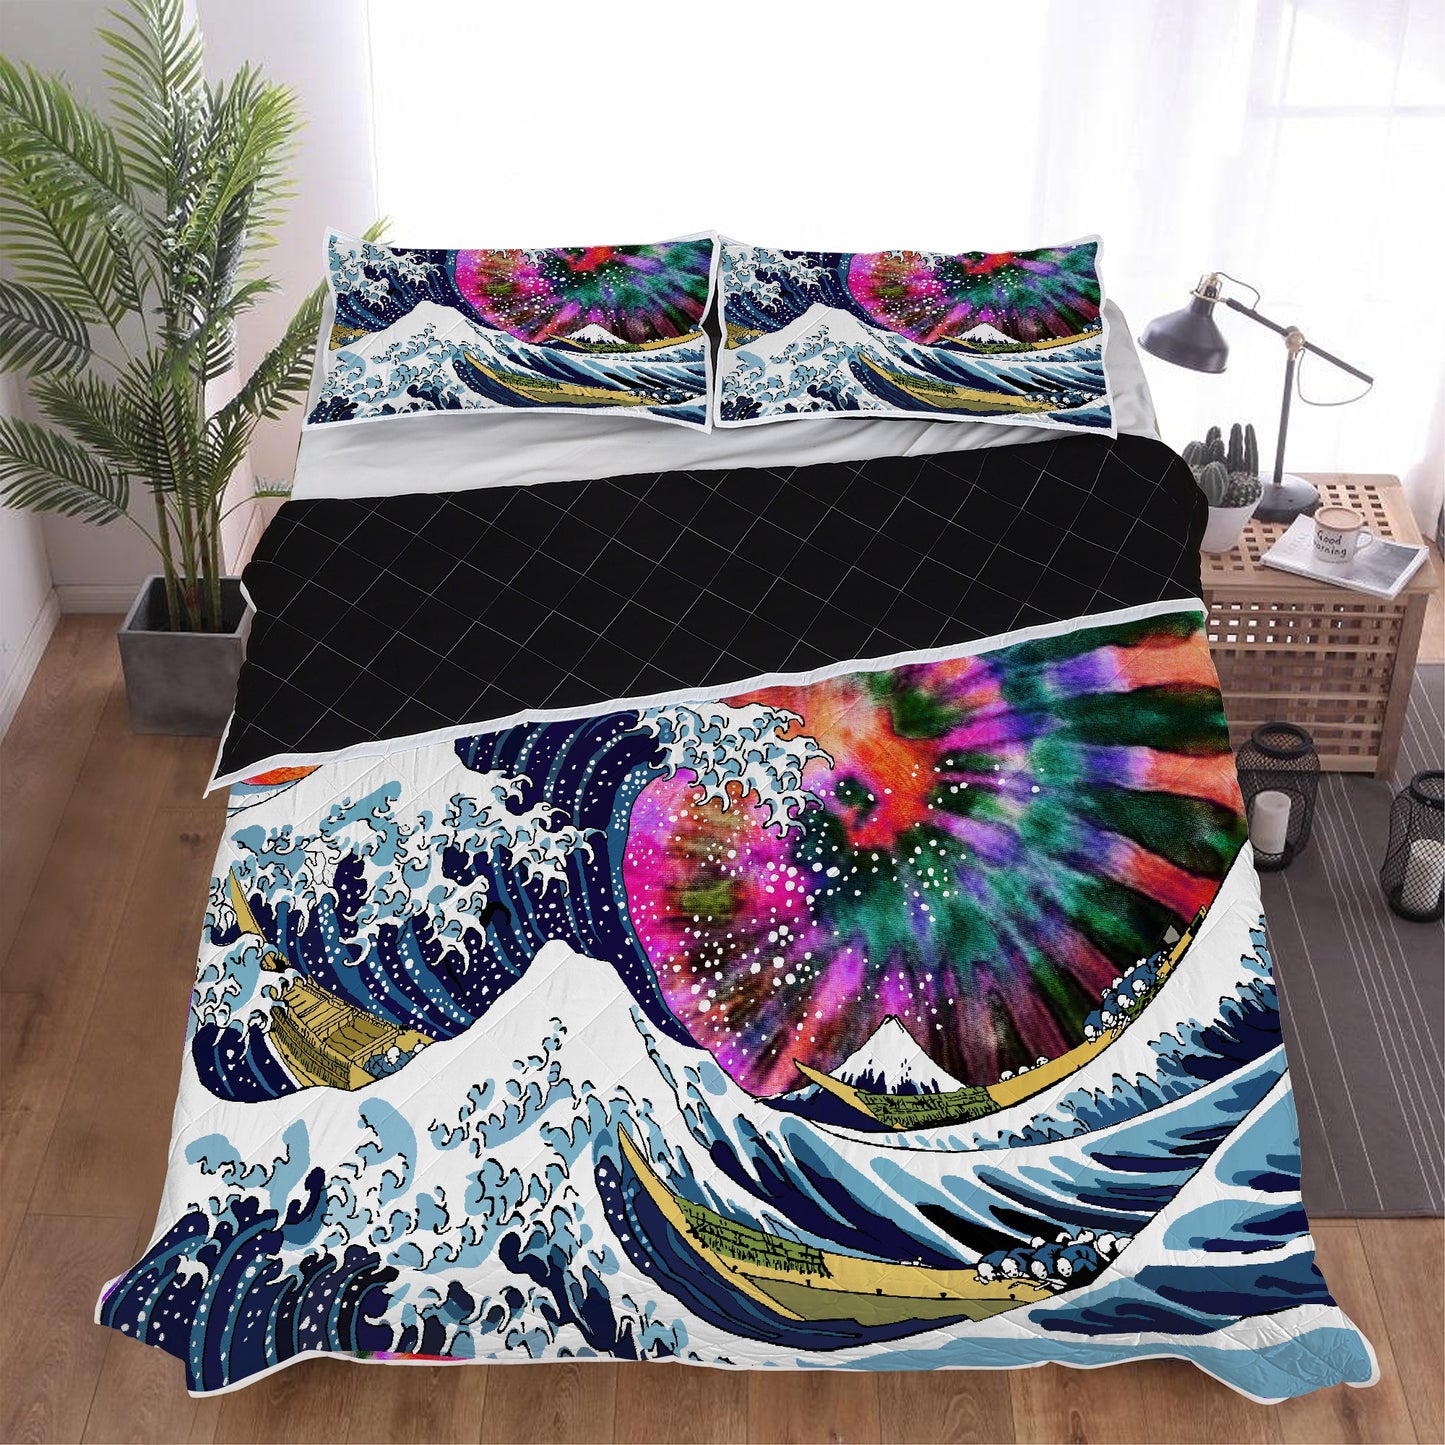 Taking the Waves to Bed with You While Sleeping with this Quilt Bed Set